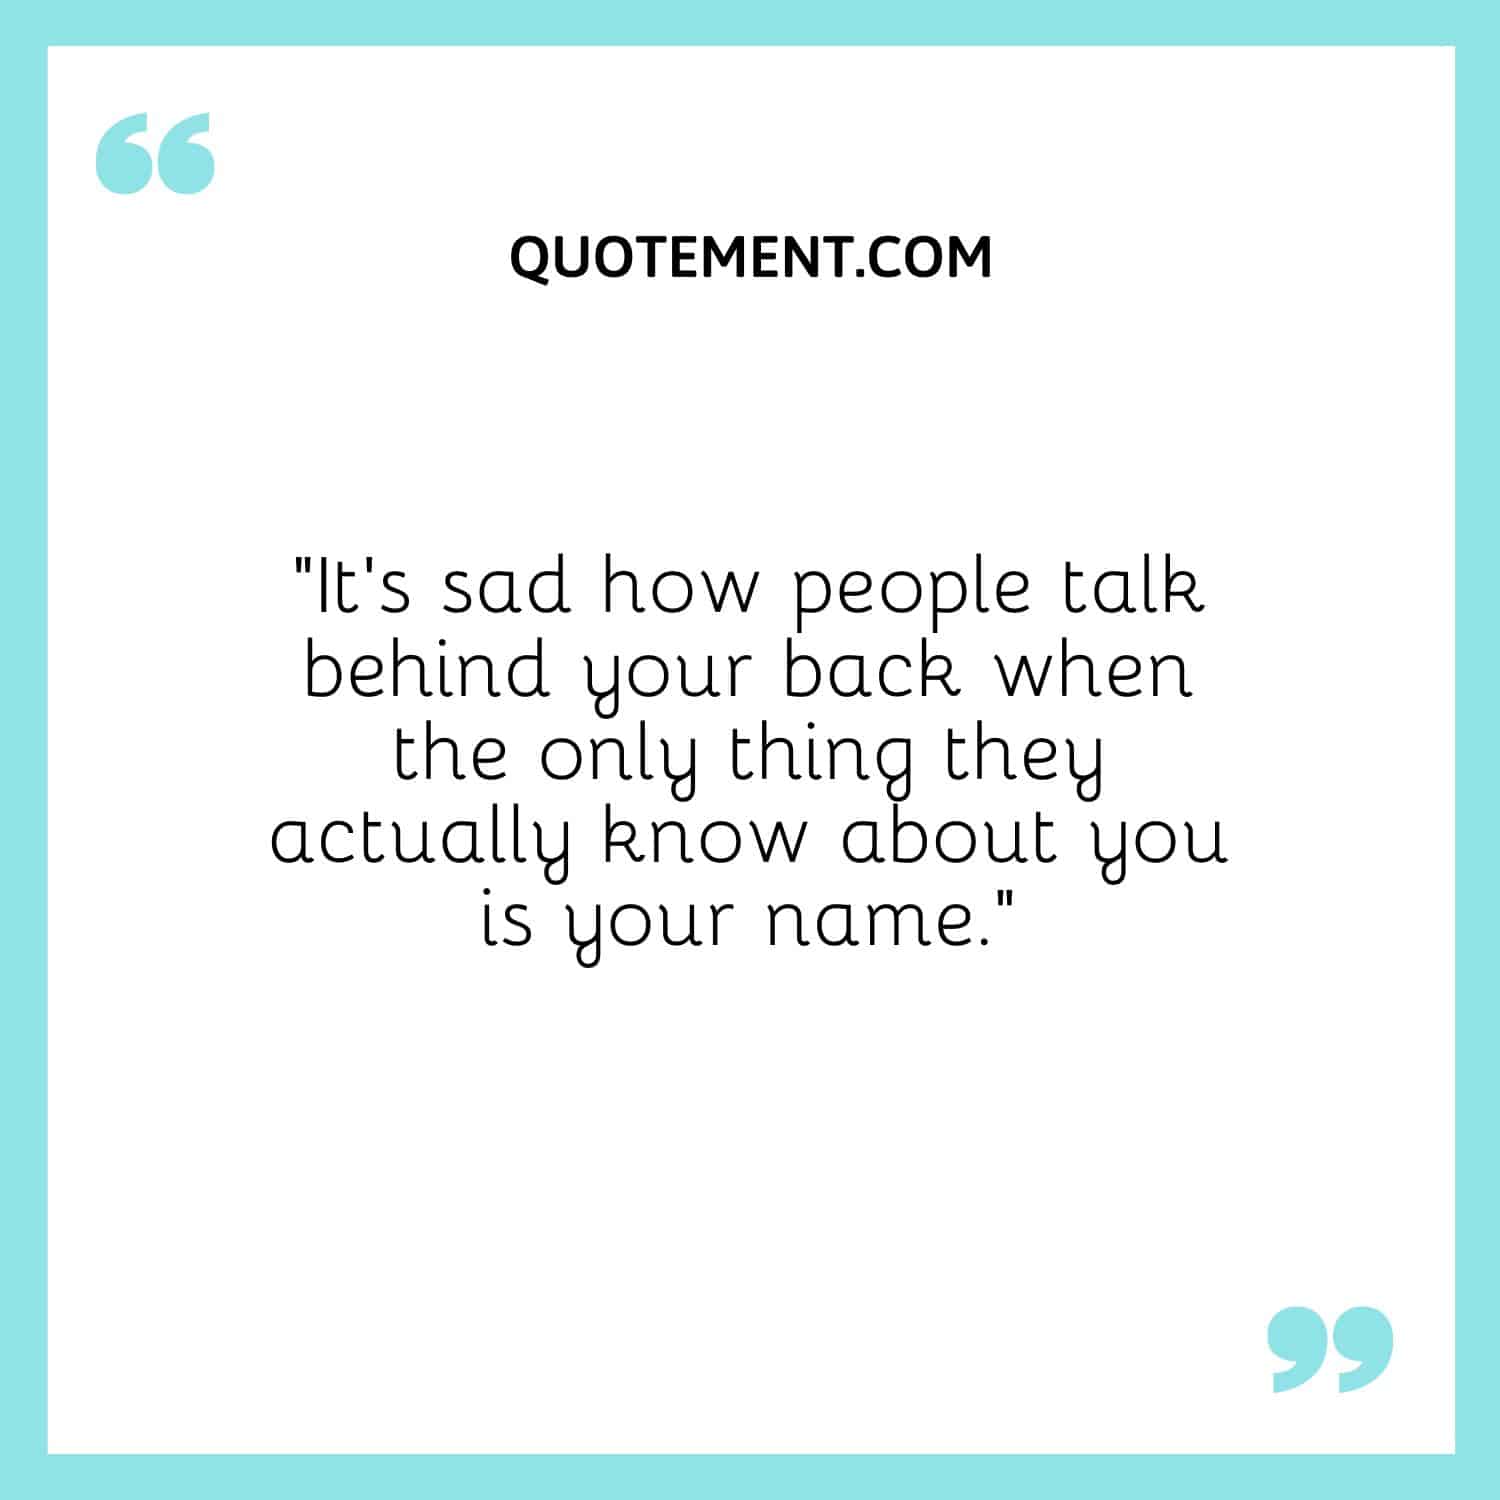 “It’s sad how people talk behind your back when the only thing they actually know about you is your name.”